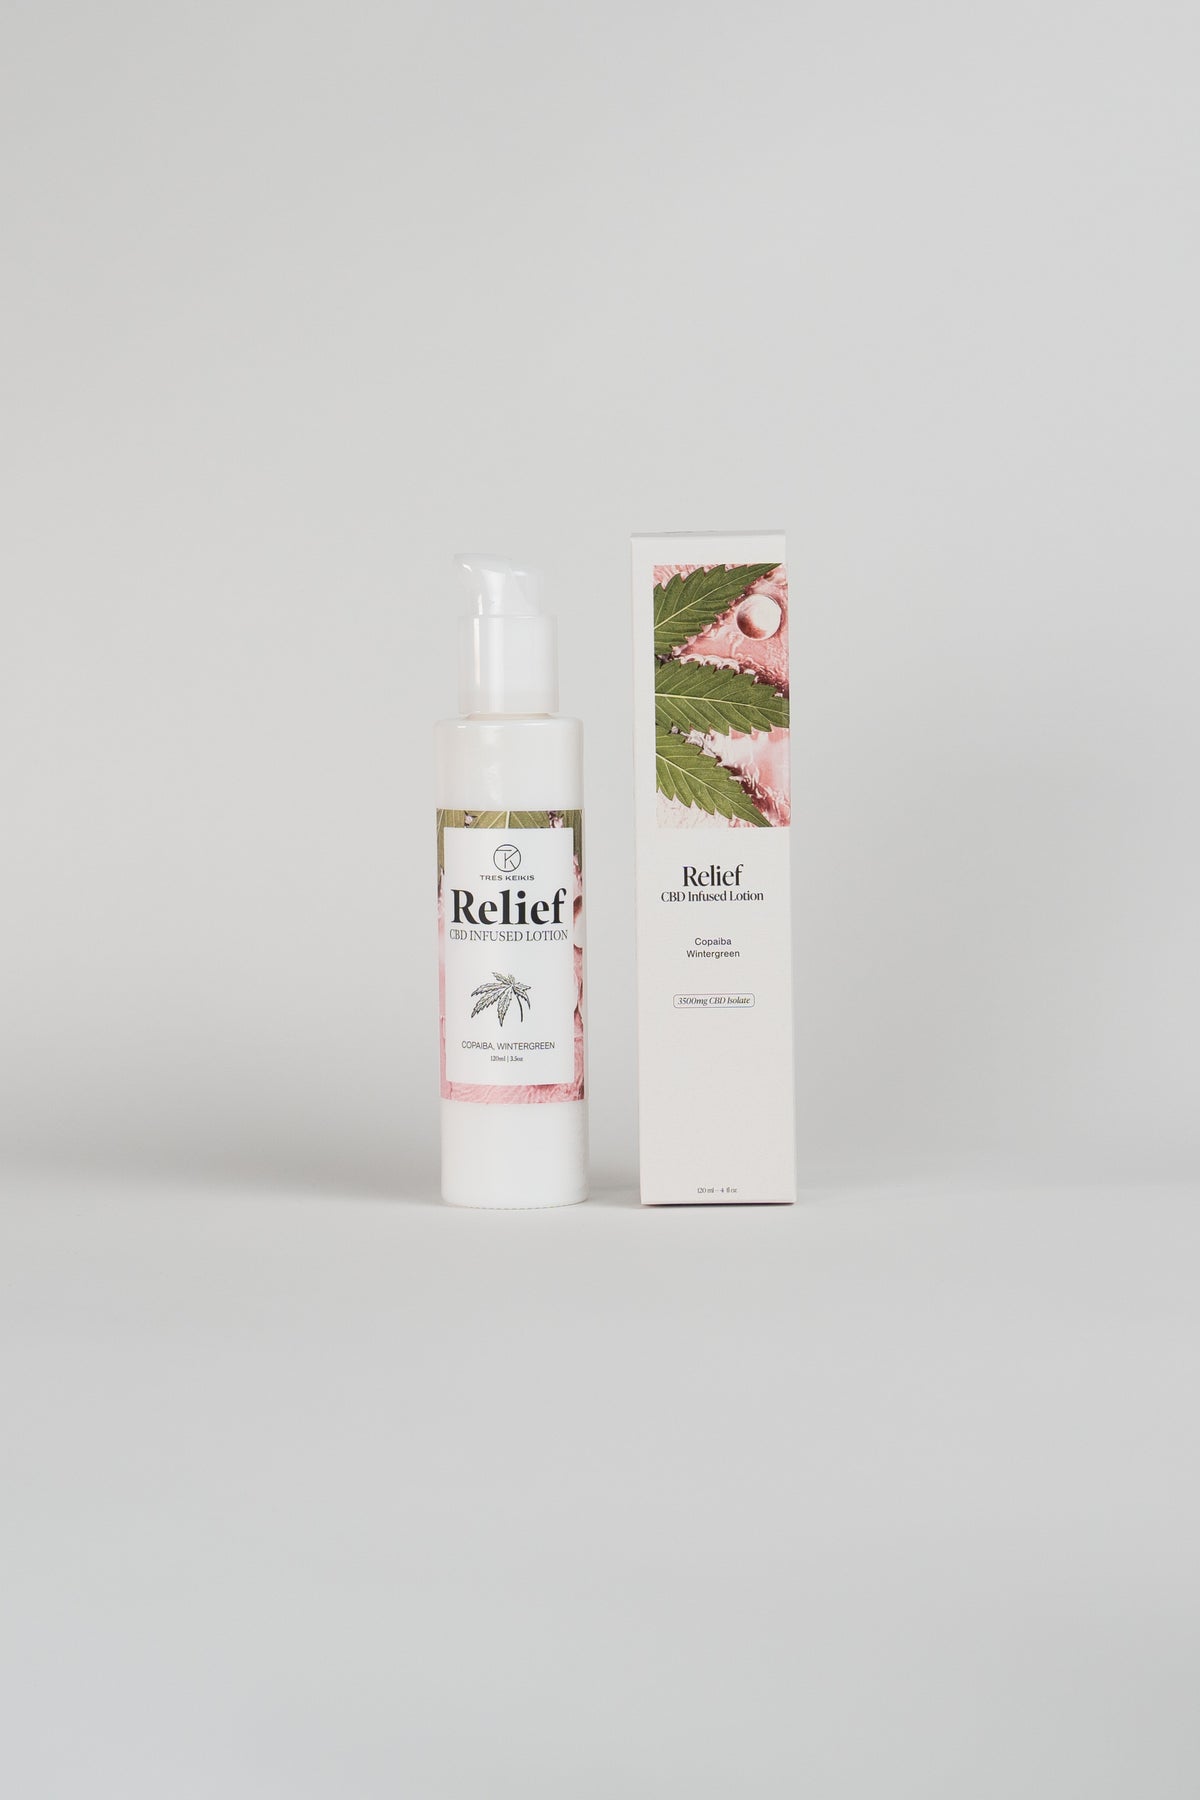 Relief CBD Infused Lotion